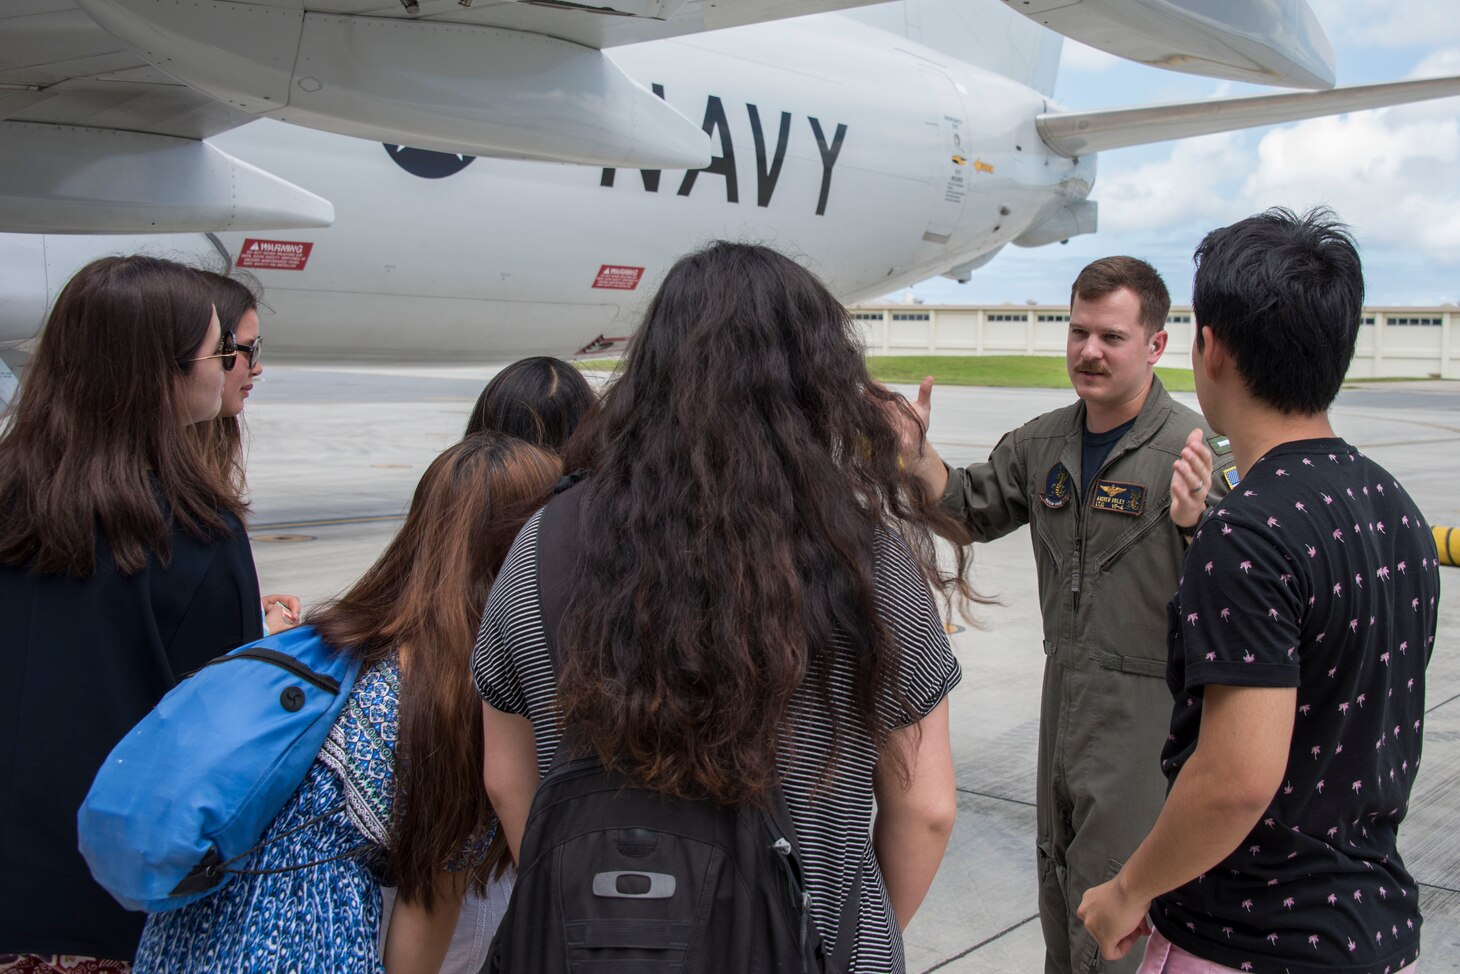 Lt. j.g. Anderew Kriley, from Pittsburgh, Pa., assigned to the "Skinny Dragons" of Patrol Squadron (VP) 4, gives a tour of a P-8A Poseidon aircraft to students from the American School in Japan. The students were in Okinawa to learn about the U.S. Navy’s and the Japan Maritime Self-Defense Force’s (JMSDF) roles, capabilities and missions.